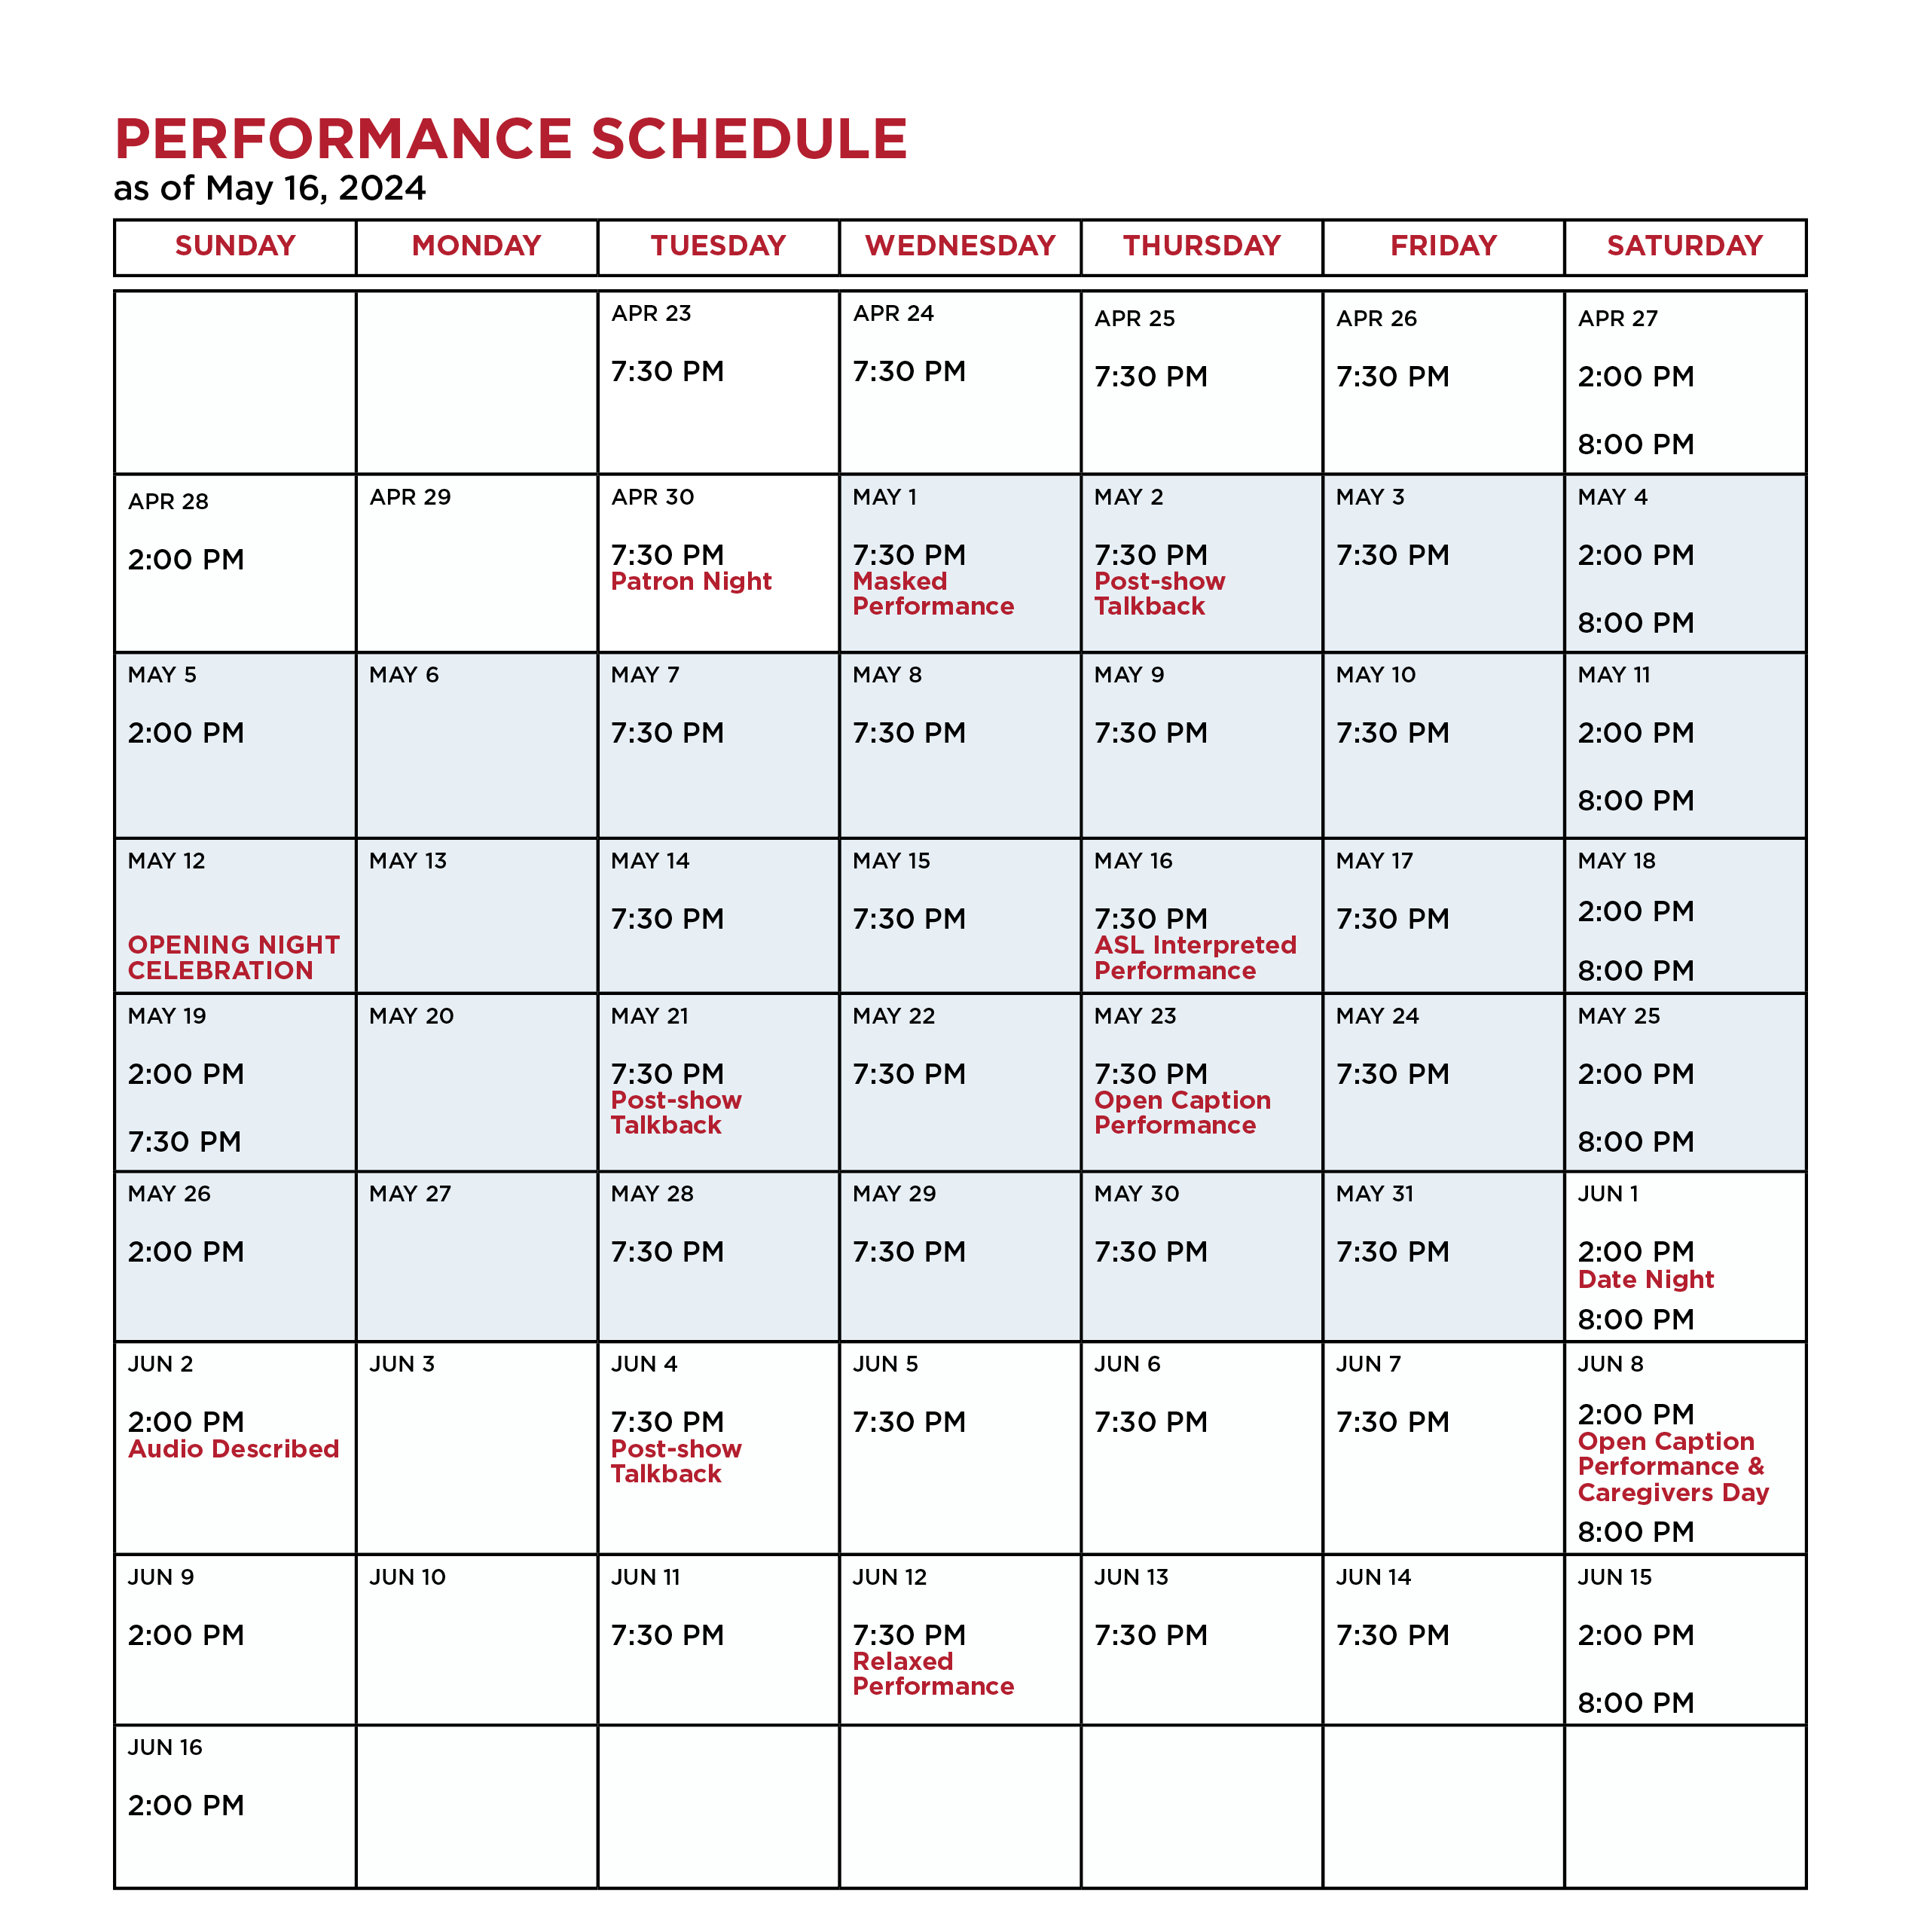 All of Me Performance Schedule as of 5/16/24. To View up to date show times, click BUY TICKETS